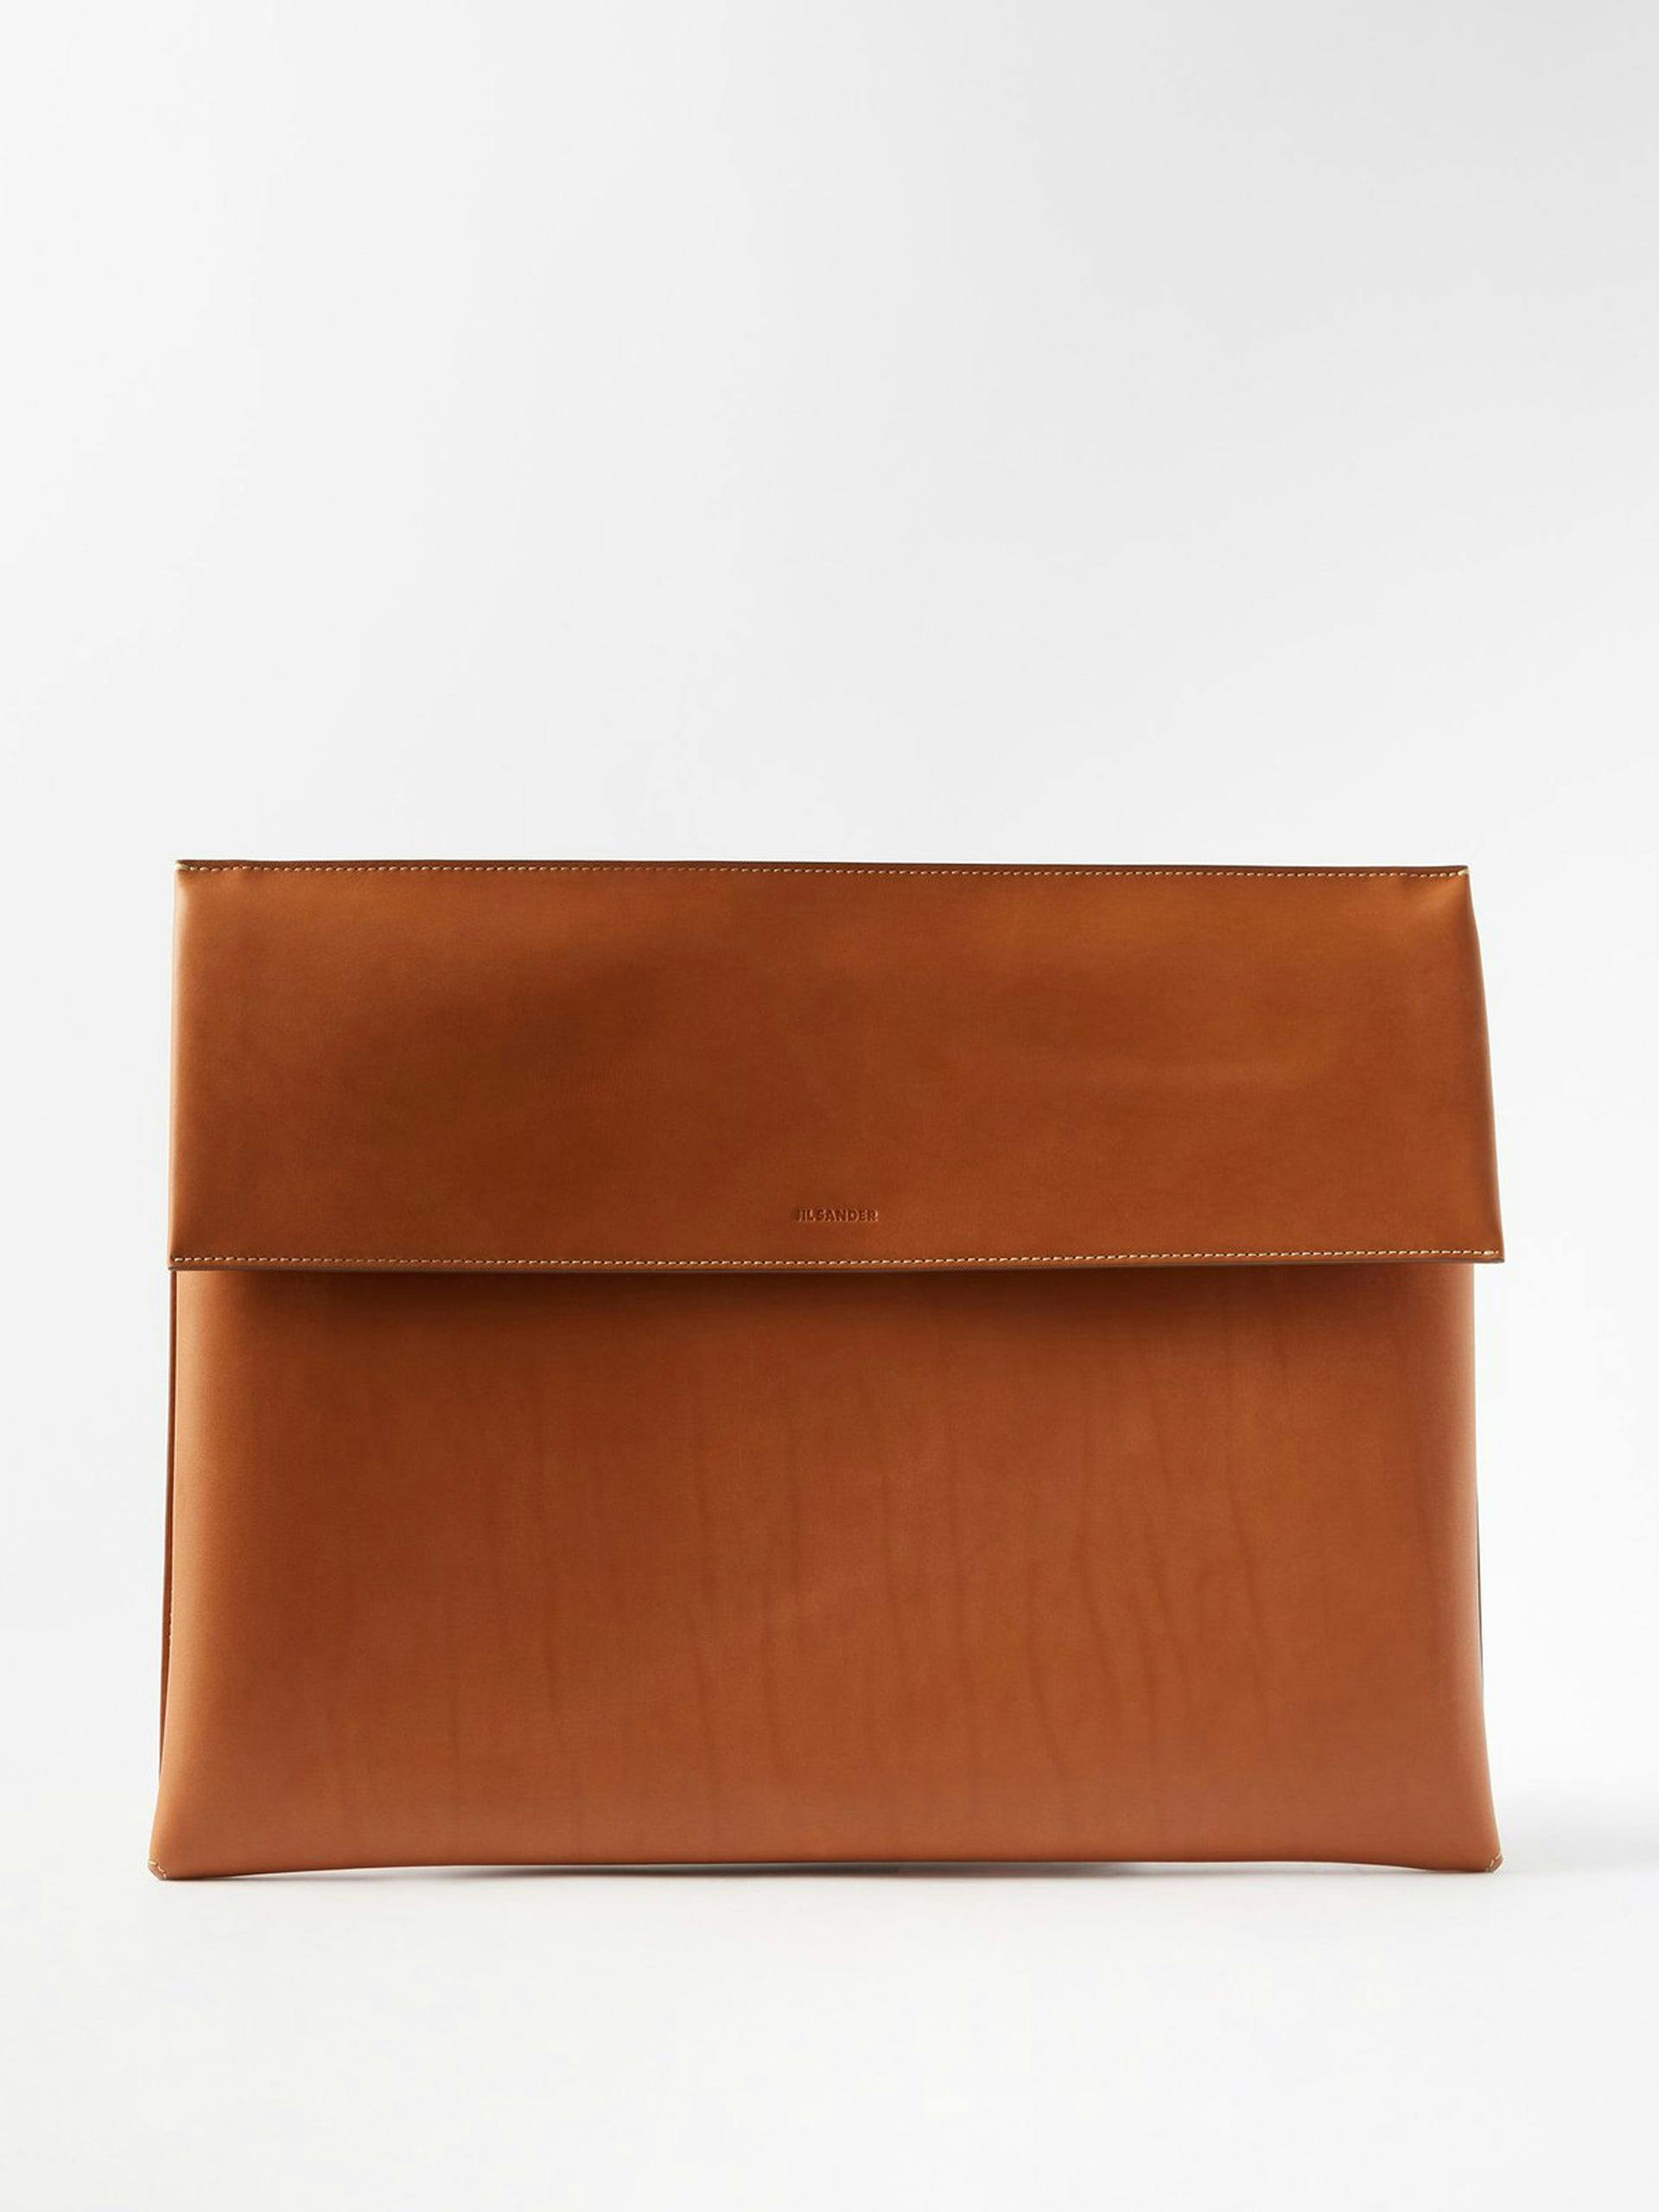 Tan folded leather pouch